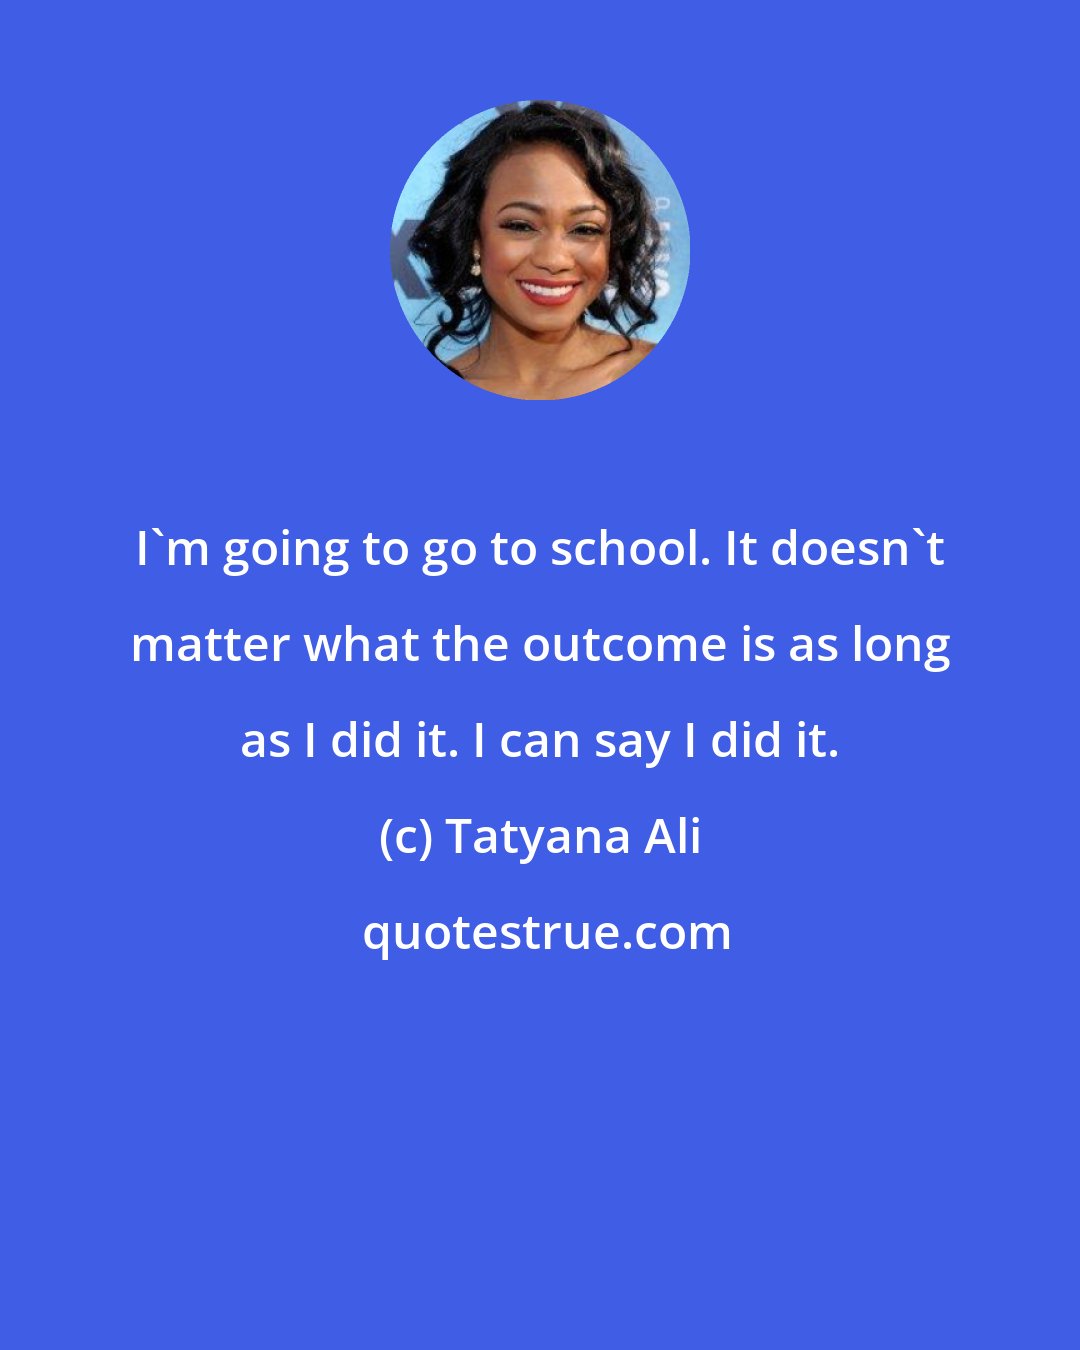 Tatyana Ali: I'm going to go to school. It doesn't matter what the outcome is as long as I did it. I can say I did it.